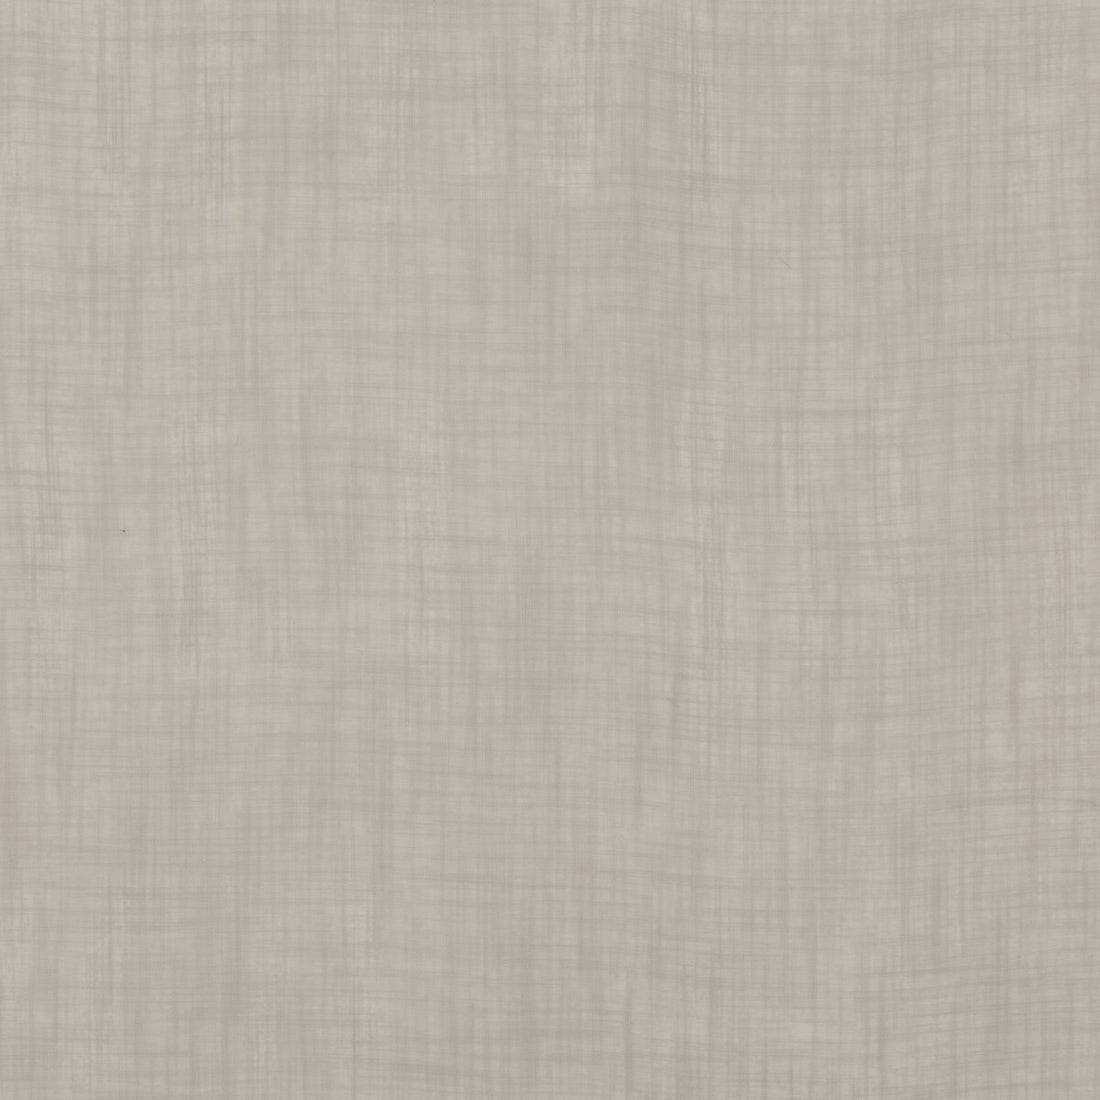 Kelso fabric in warm grey color - pattern PV1005.938.0 - by Baker Lifestyle in the Notebooks collection